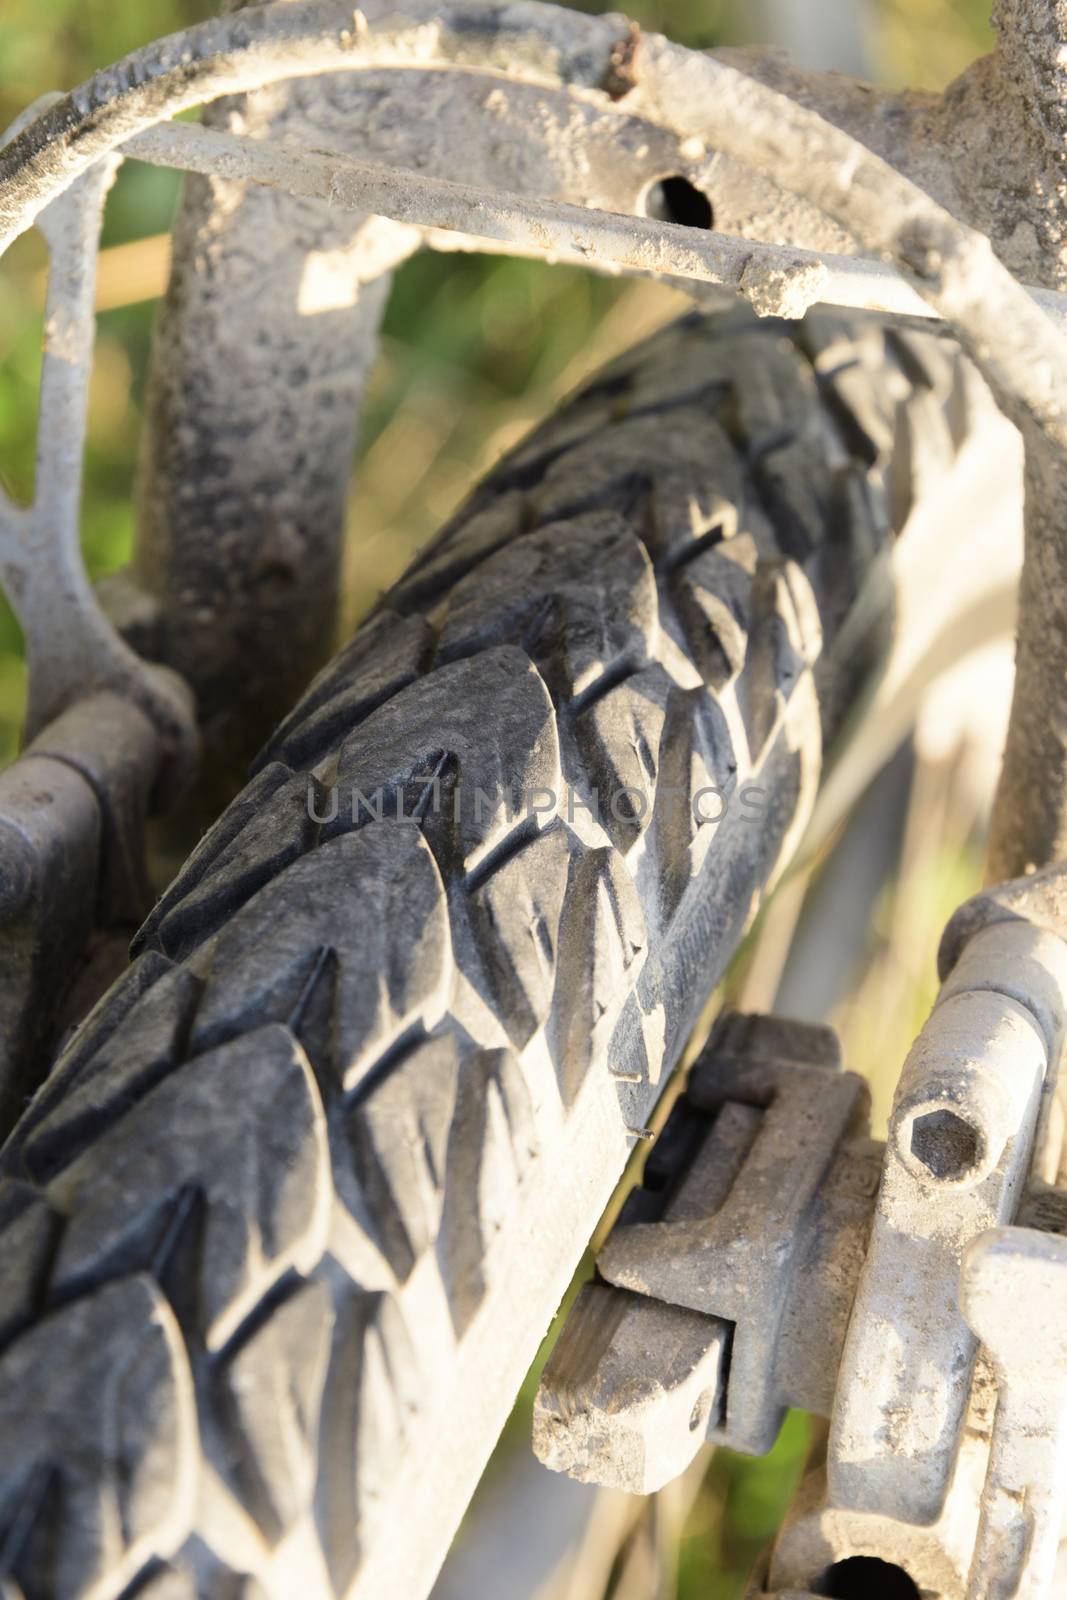 Close-up of bicycle tire with earth